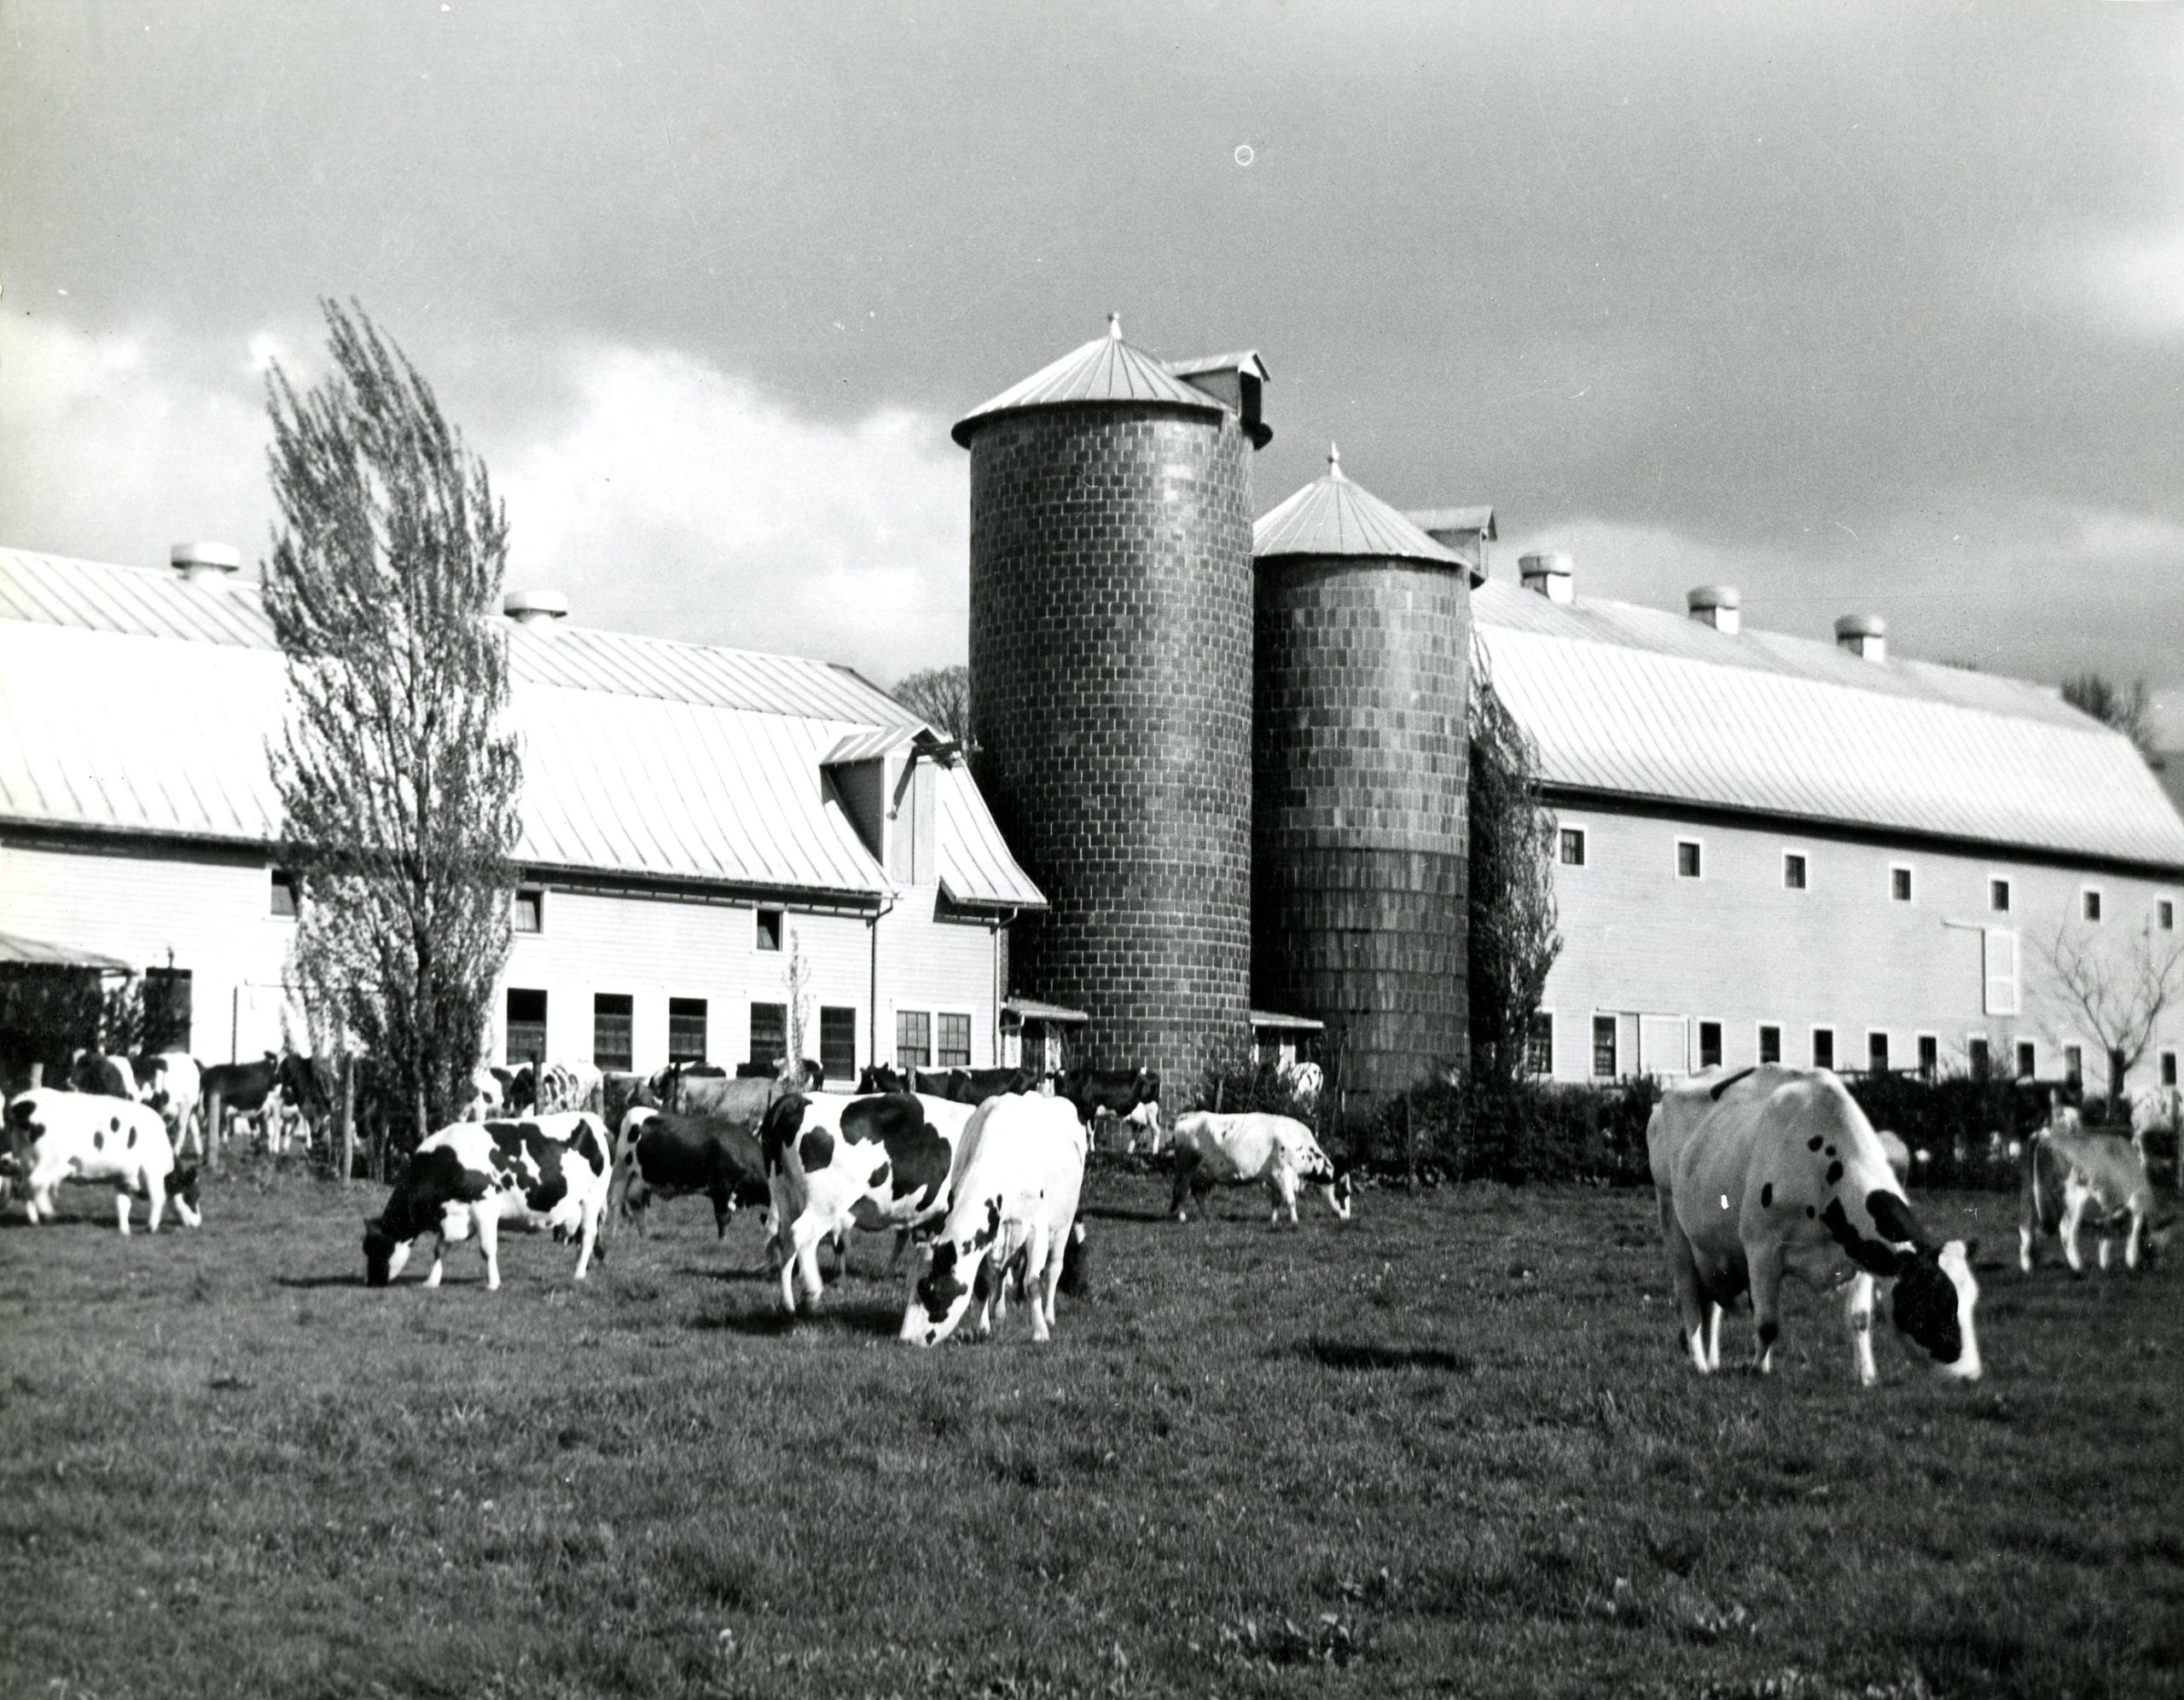 Dairy cows in front of a barn